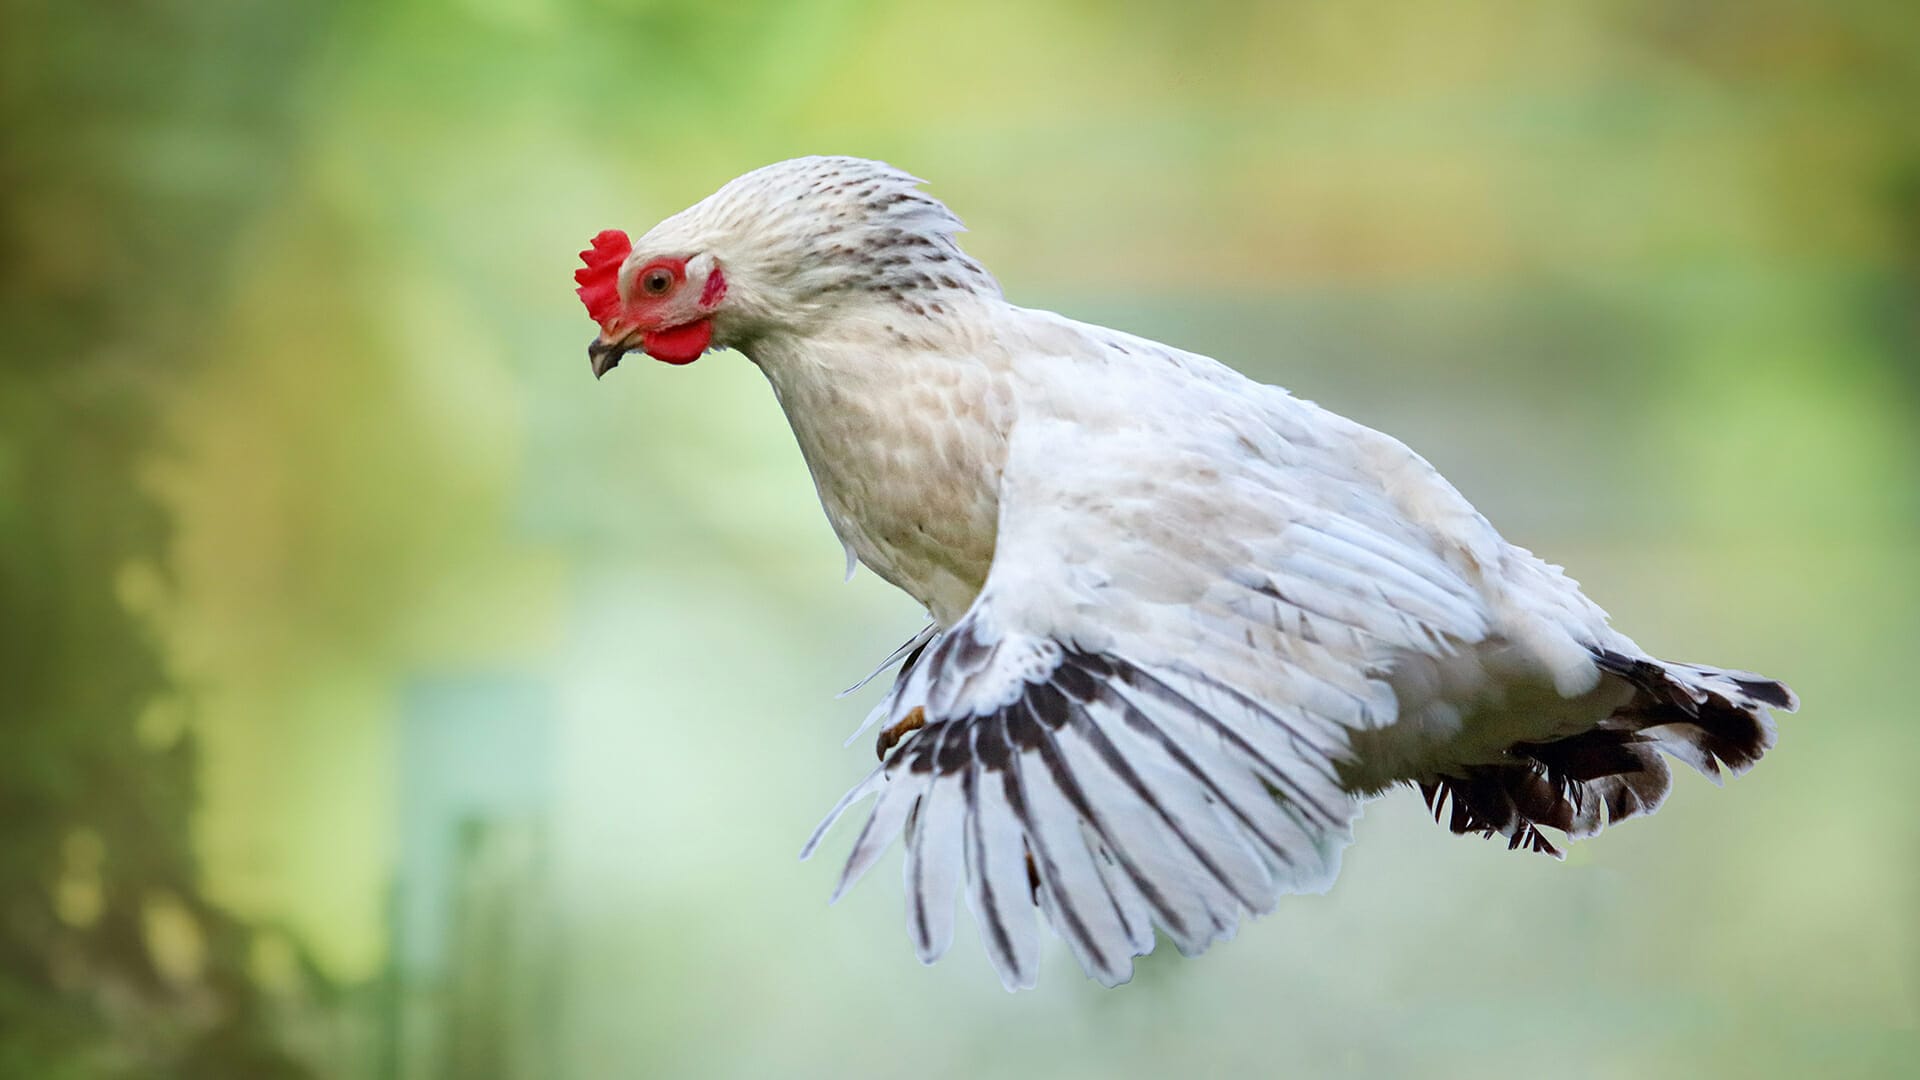 10 Things About Chickens You Didn’t Know